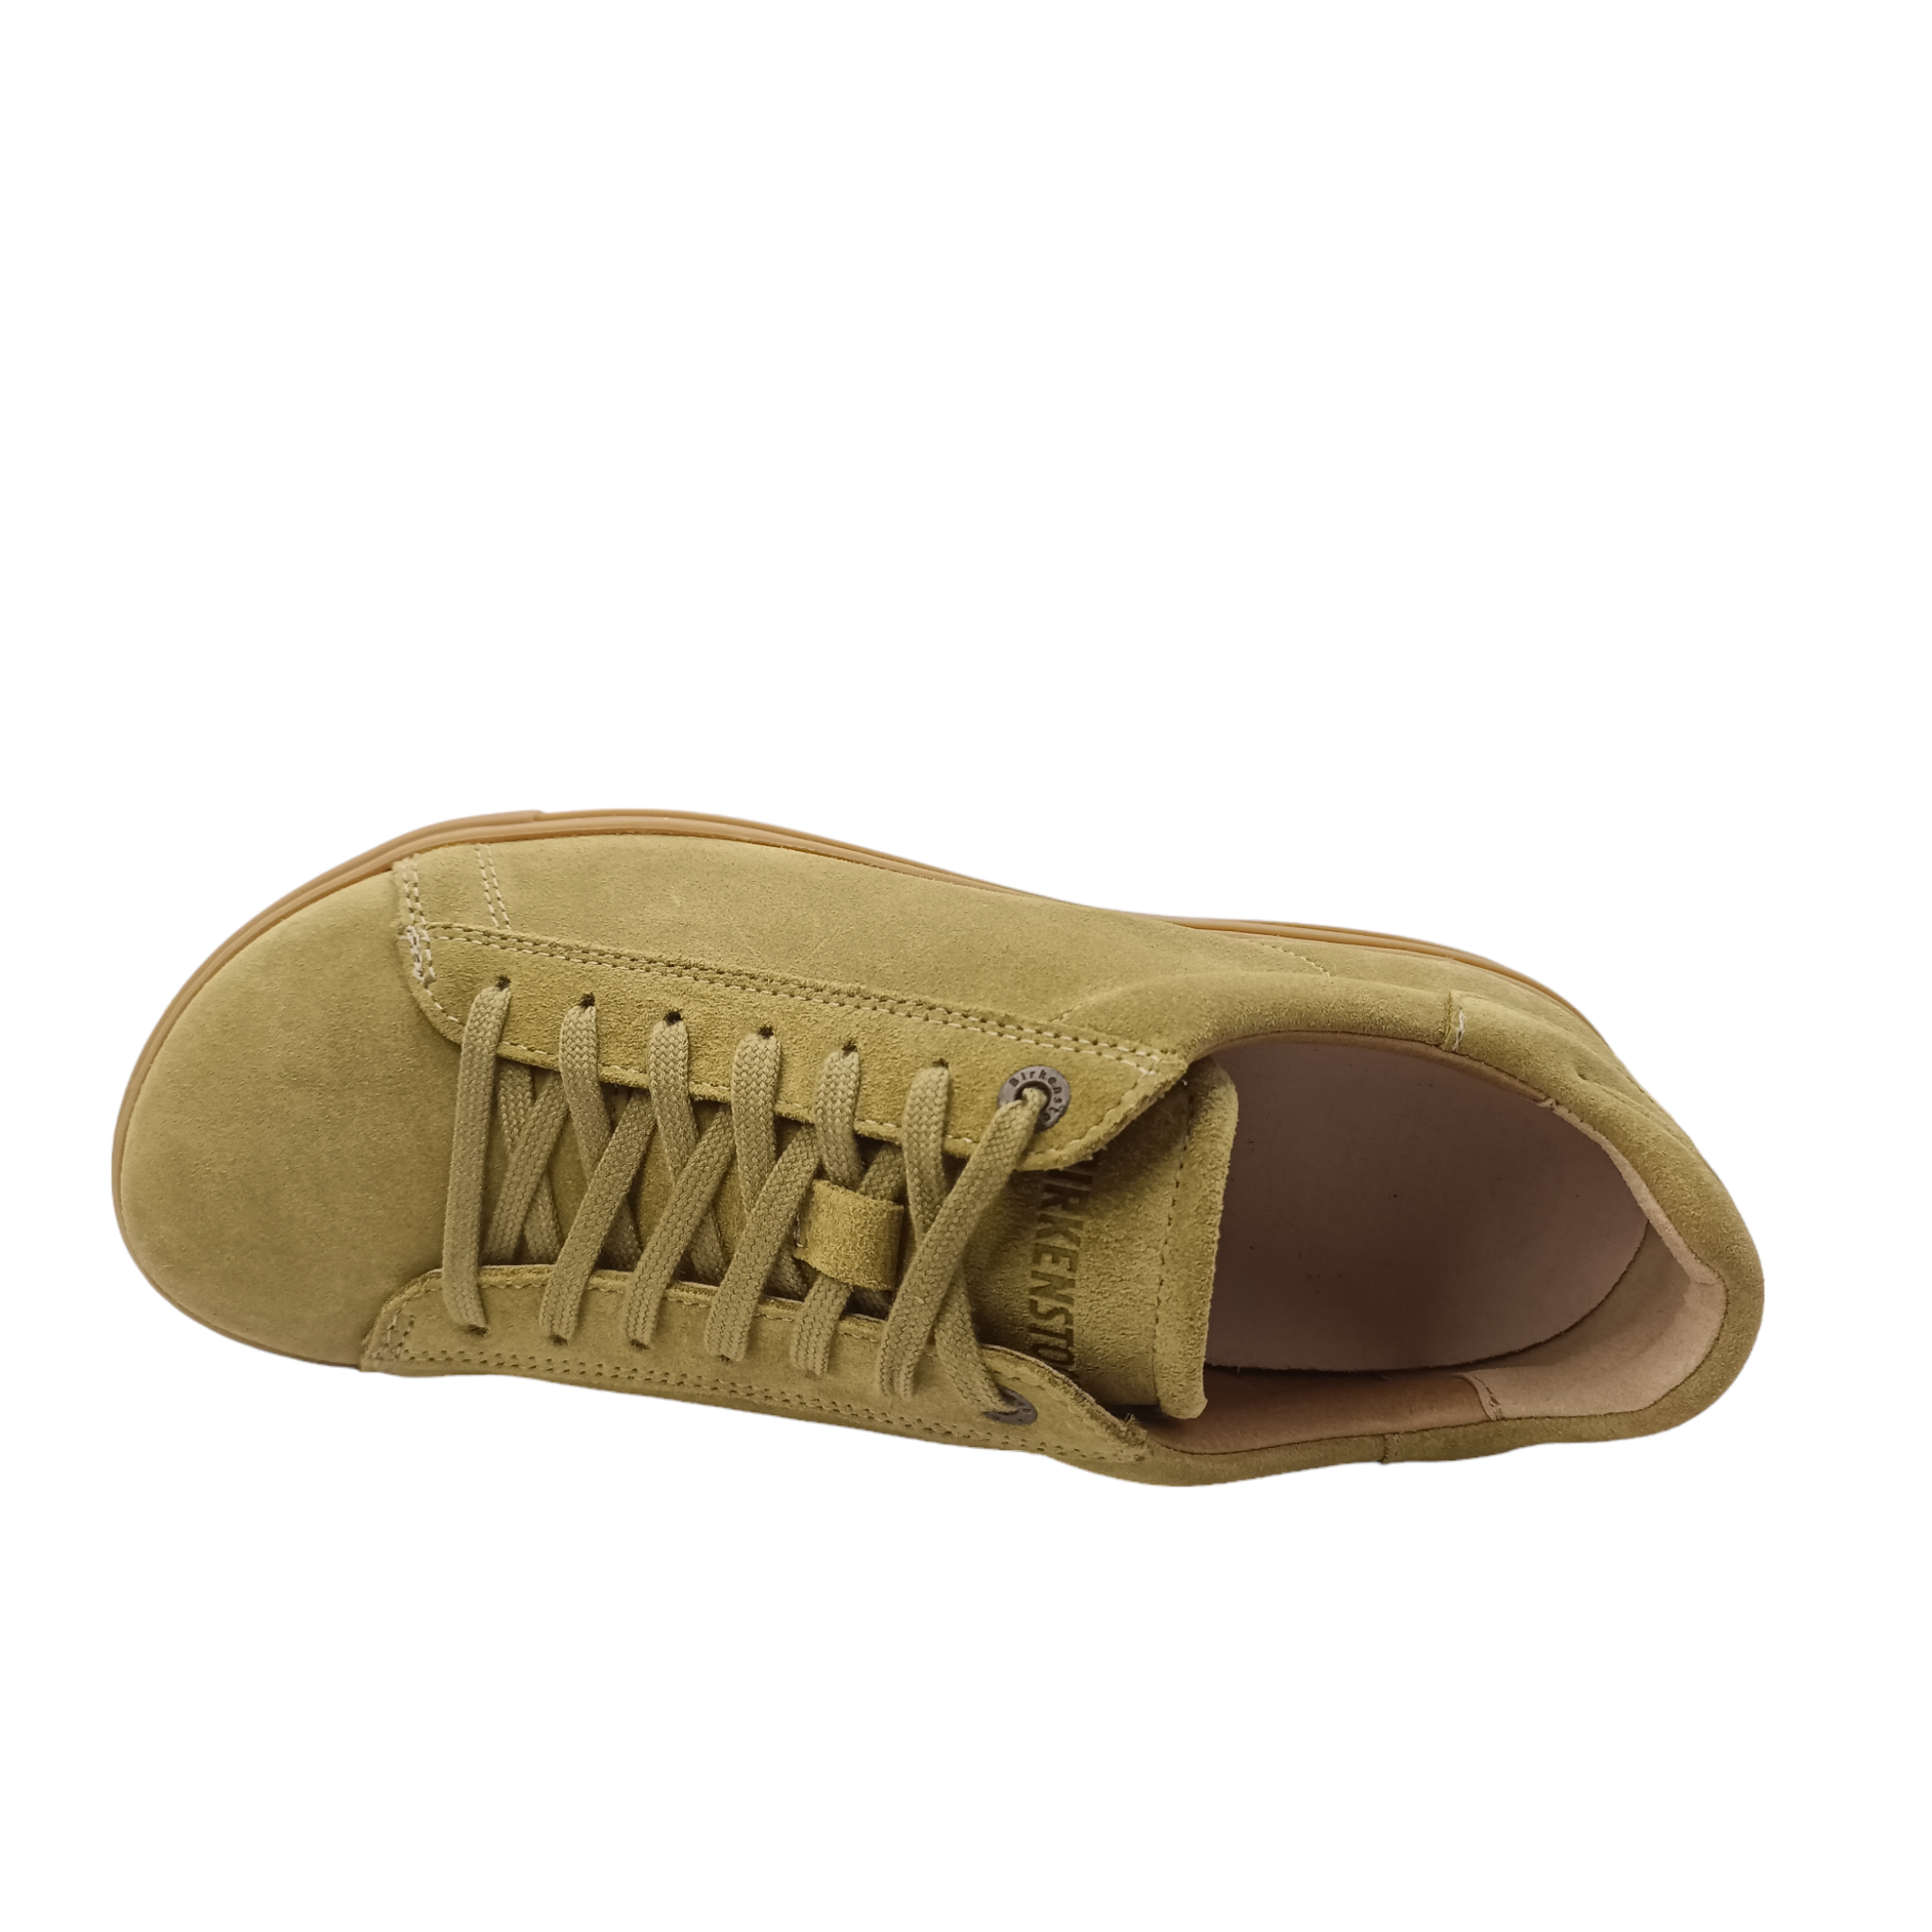 Shop Women's Birkenstock shoes. Top view of Khaki Suede Sneaker with tan coloured sole with a small cork line around the heel. Green Laces with a padded heel. Shop Birkenstock Shoes Online and In-store with shoe&me Mount Maunganui NZ